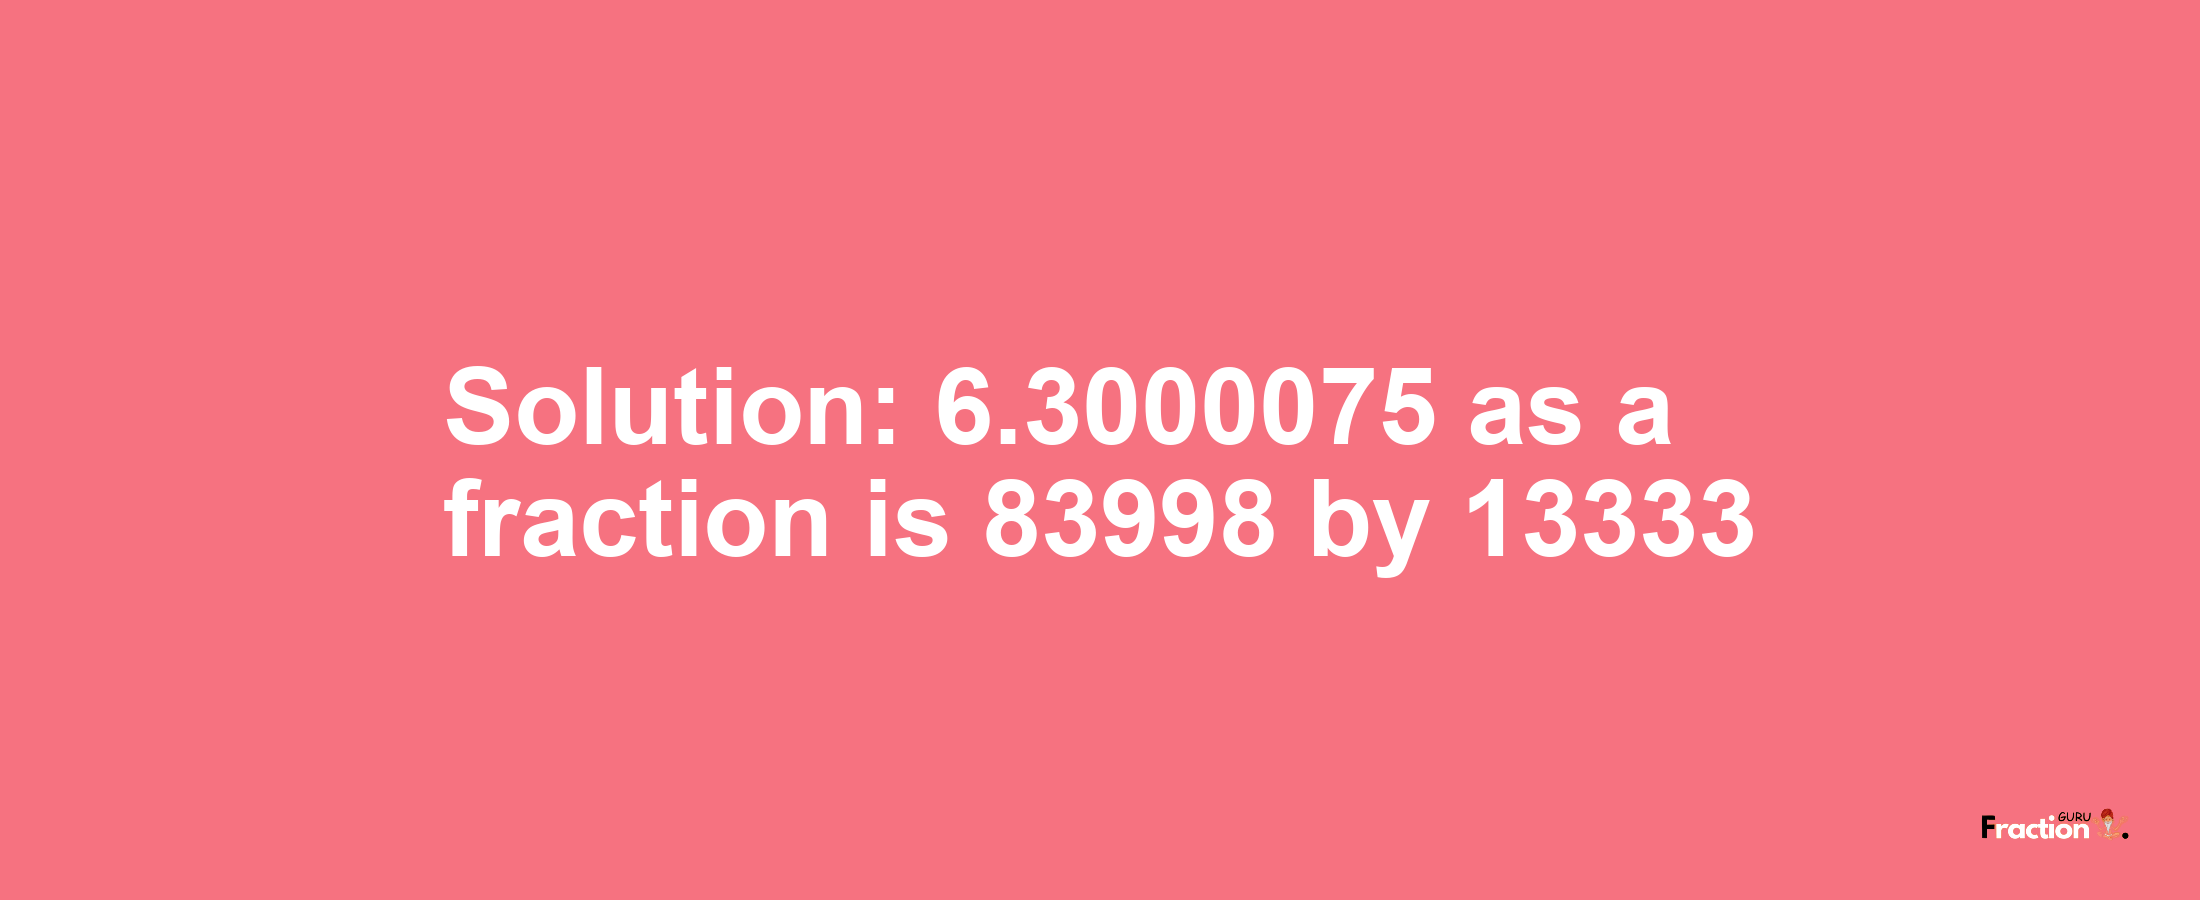 Solution:6.3000075 as a fraction is 83998/13333